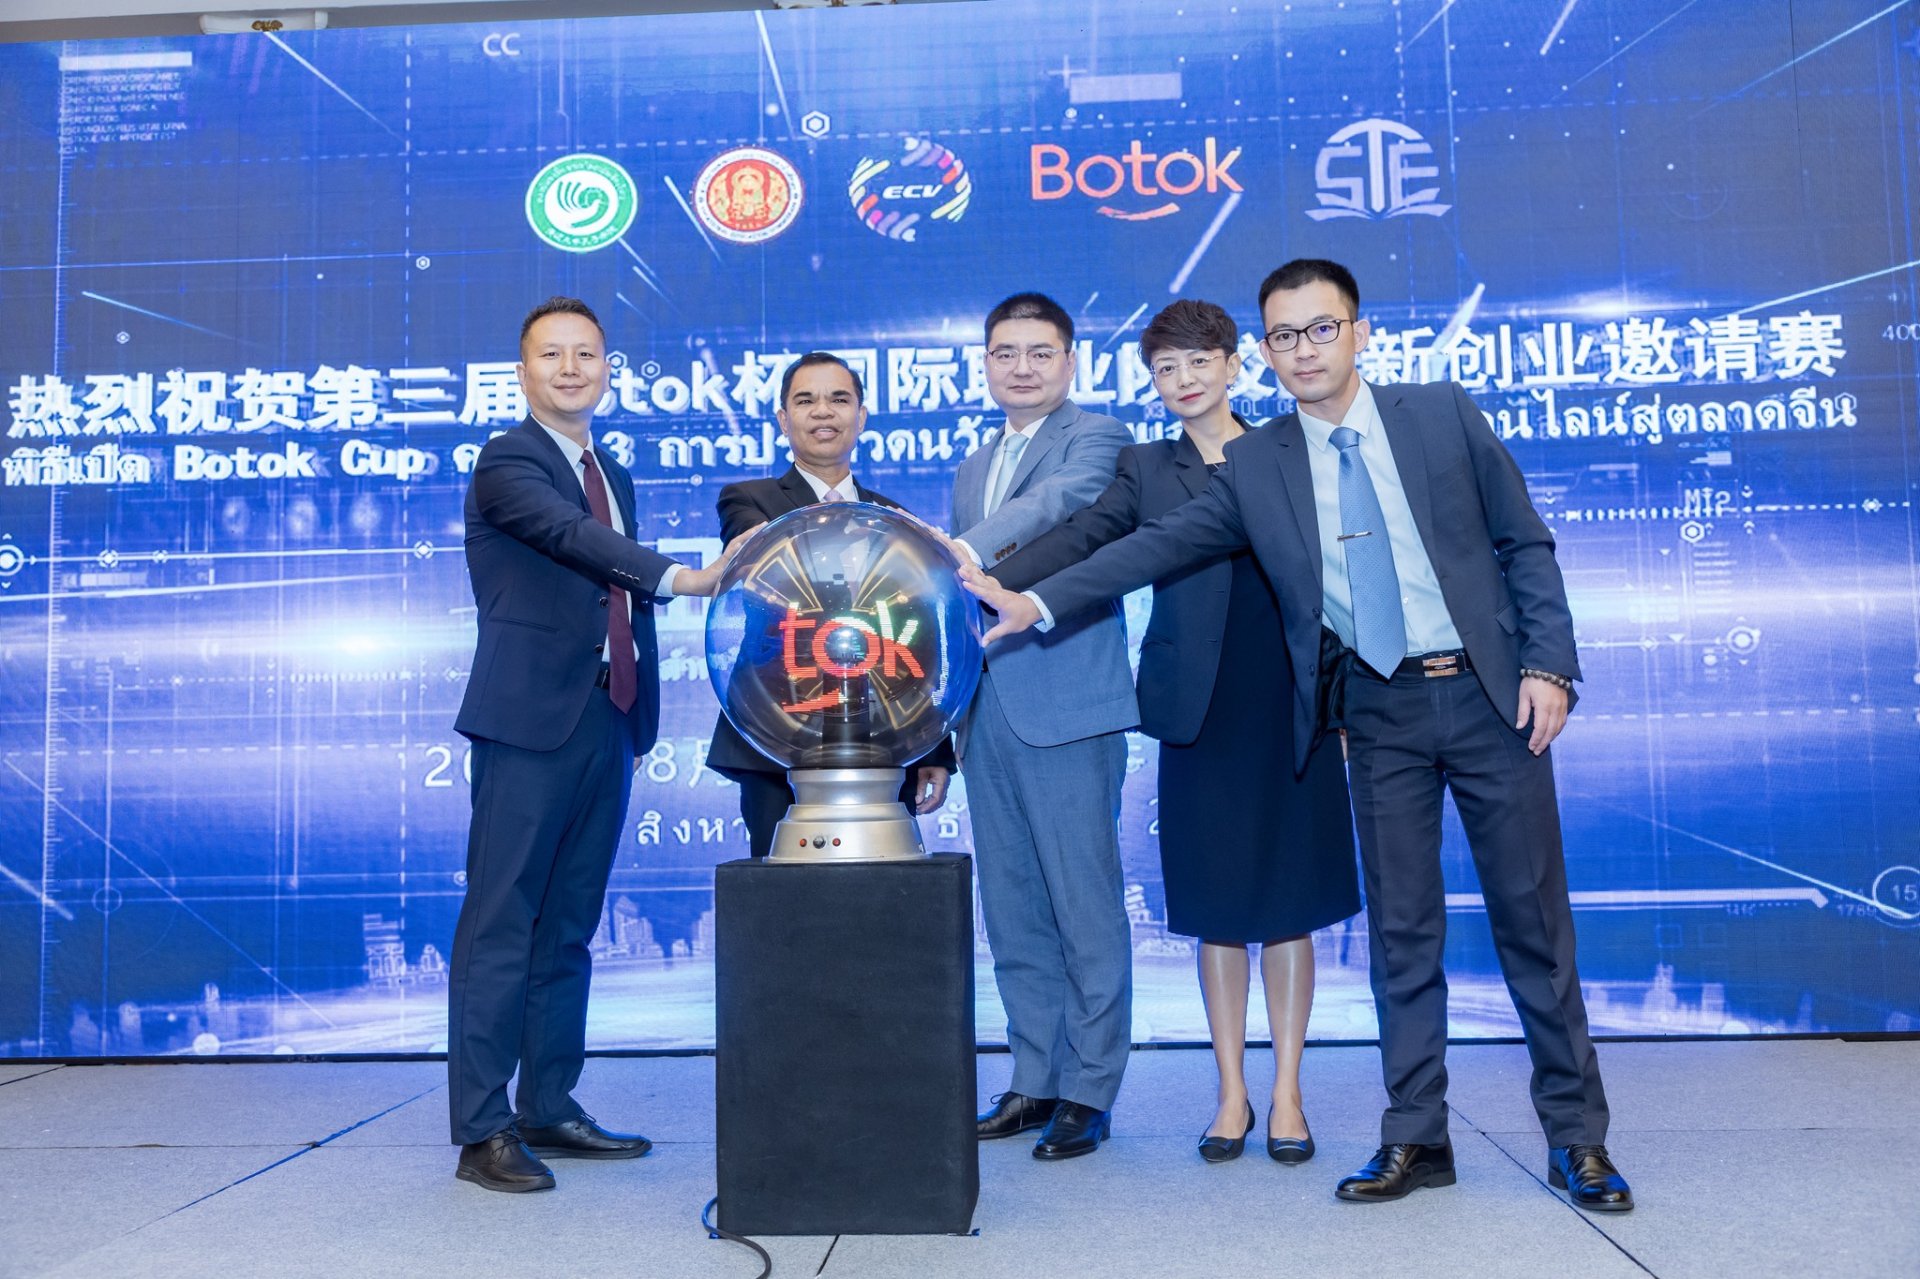 Opening Ceremony of the Botok Cup, the 3rd Innovation and Online Media Contest to the Chinese Market, and the Electronic Commerce and Digital Skills Seminar. Smooth success.